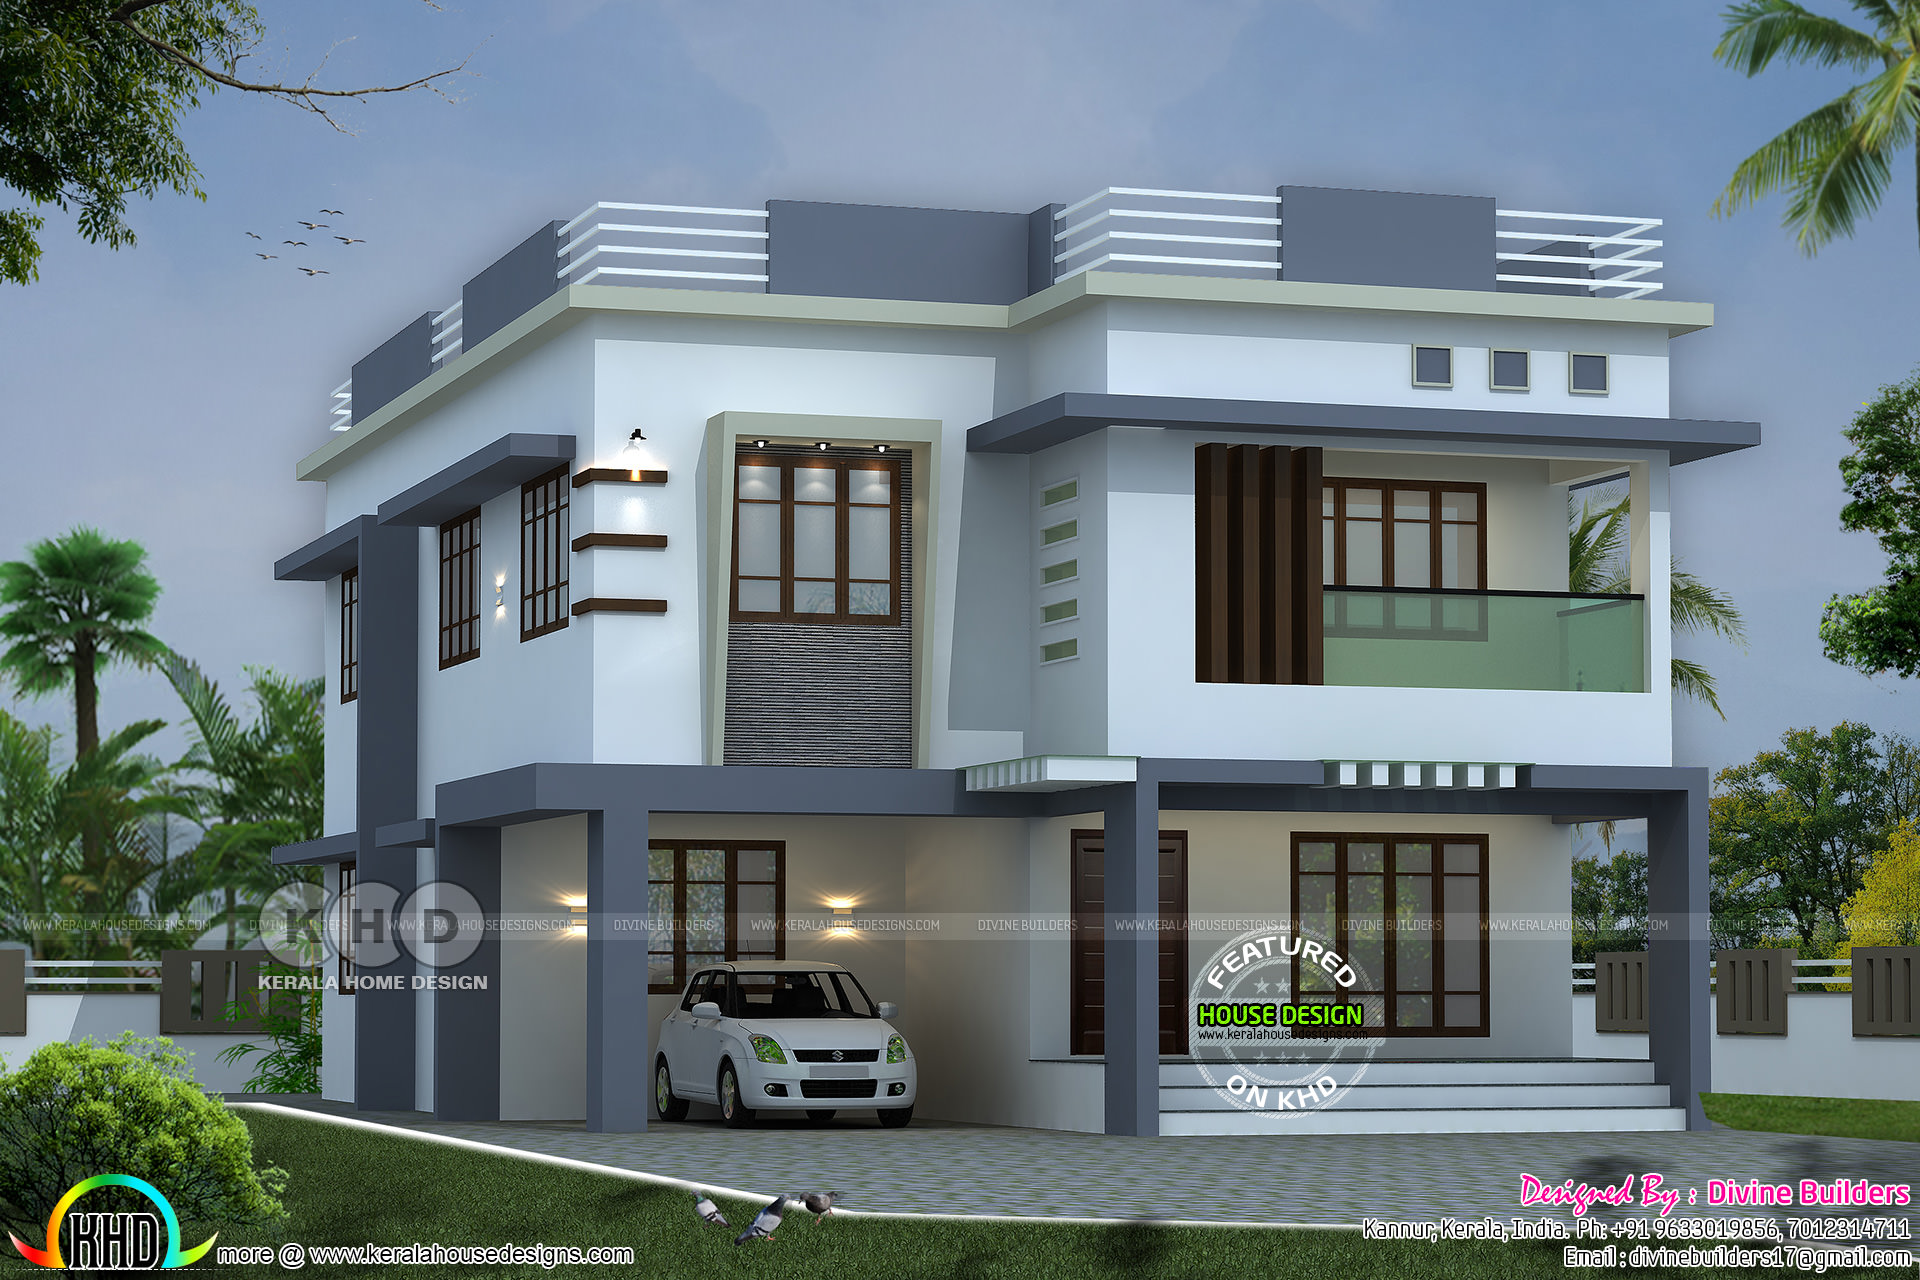  55 lakhs cost  estimated 5 BHK house  plan  Kerala  home  